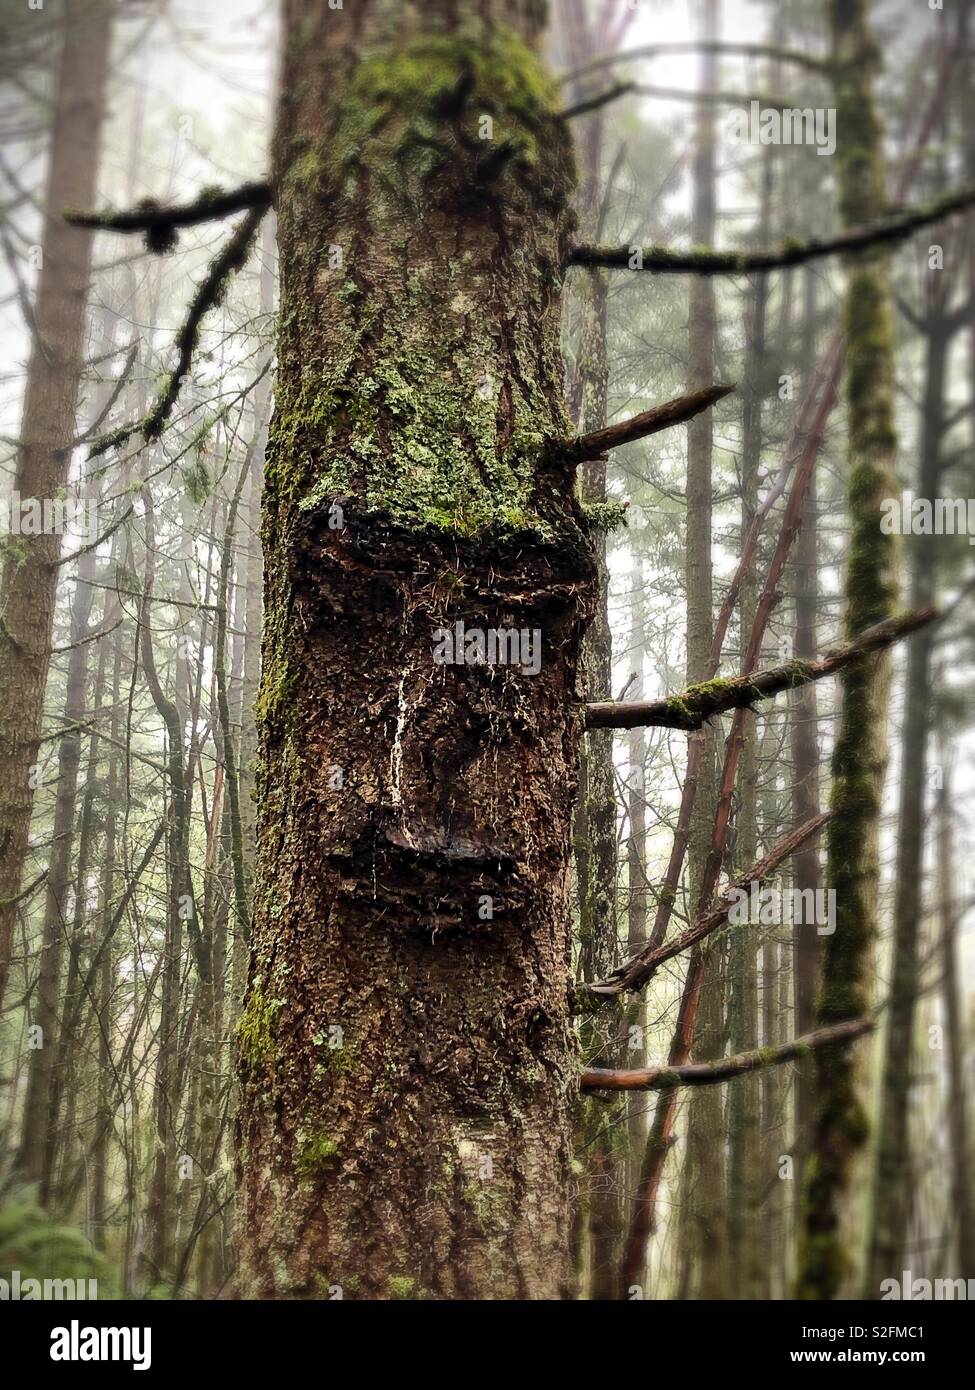 A tree that looks like it has a face. Stock Photo